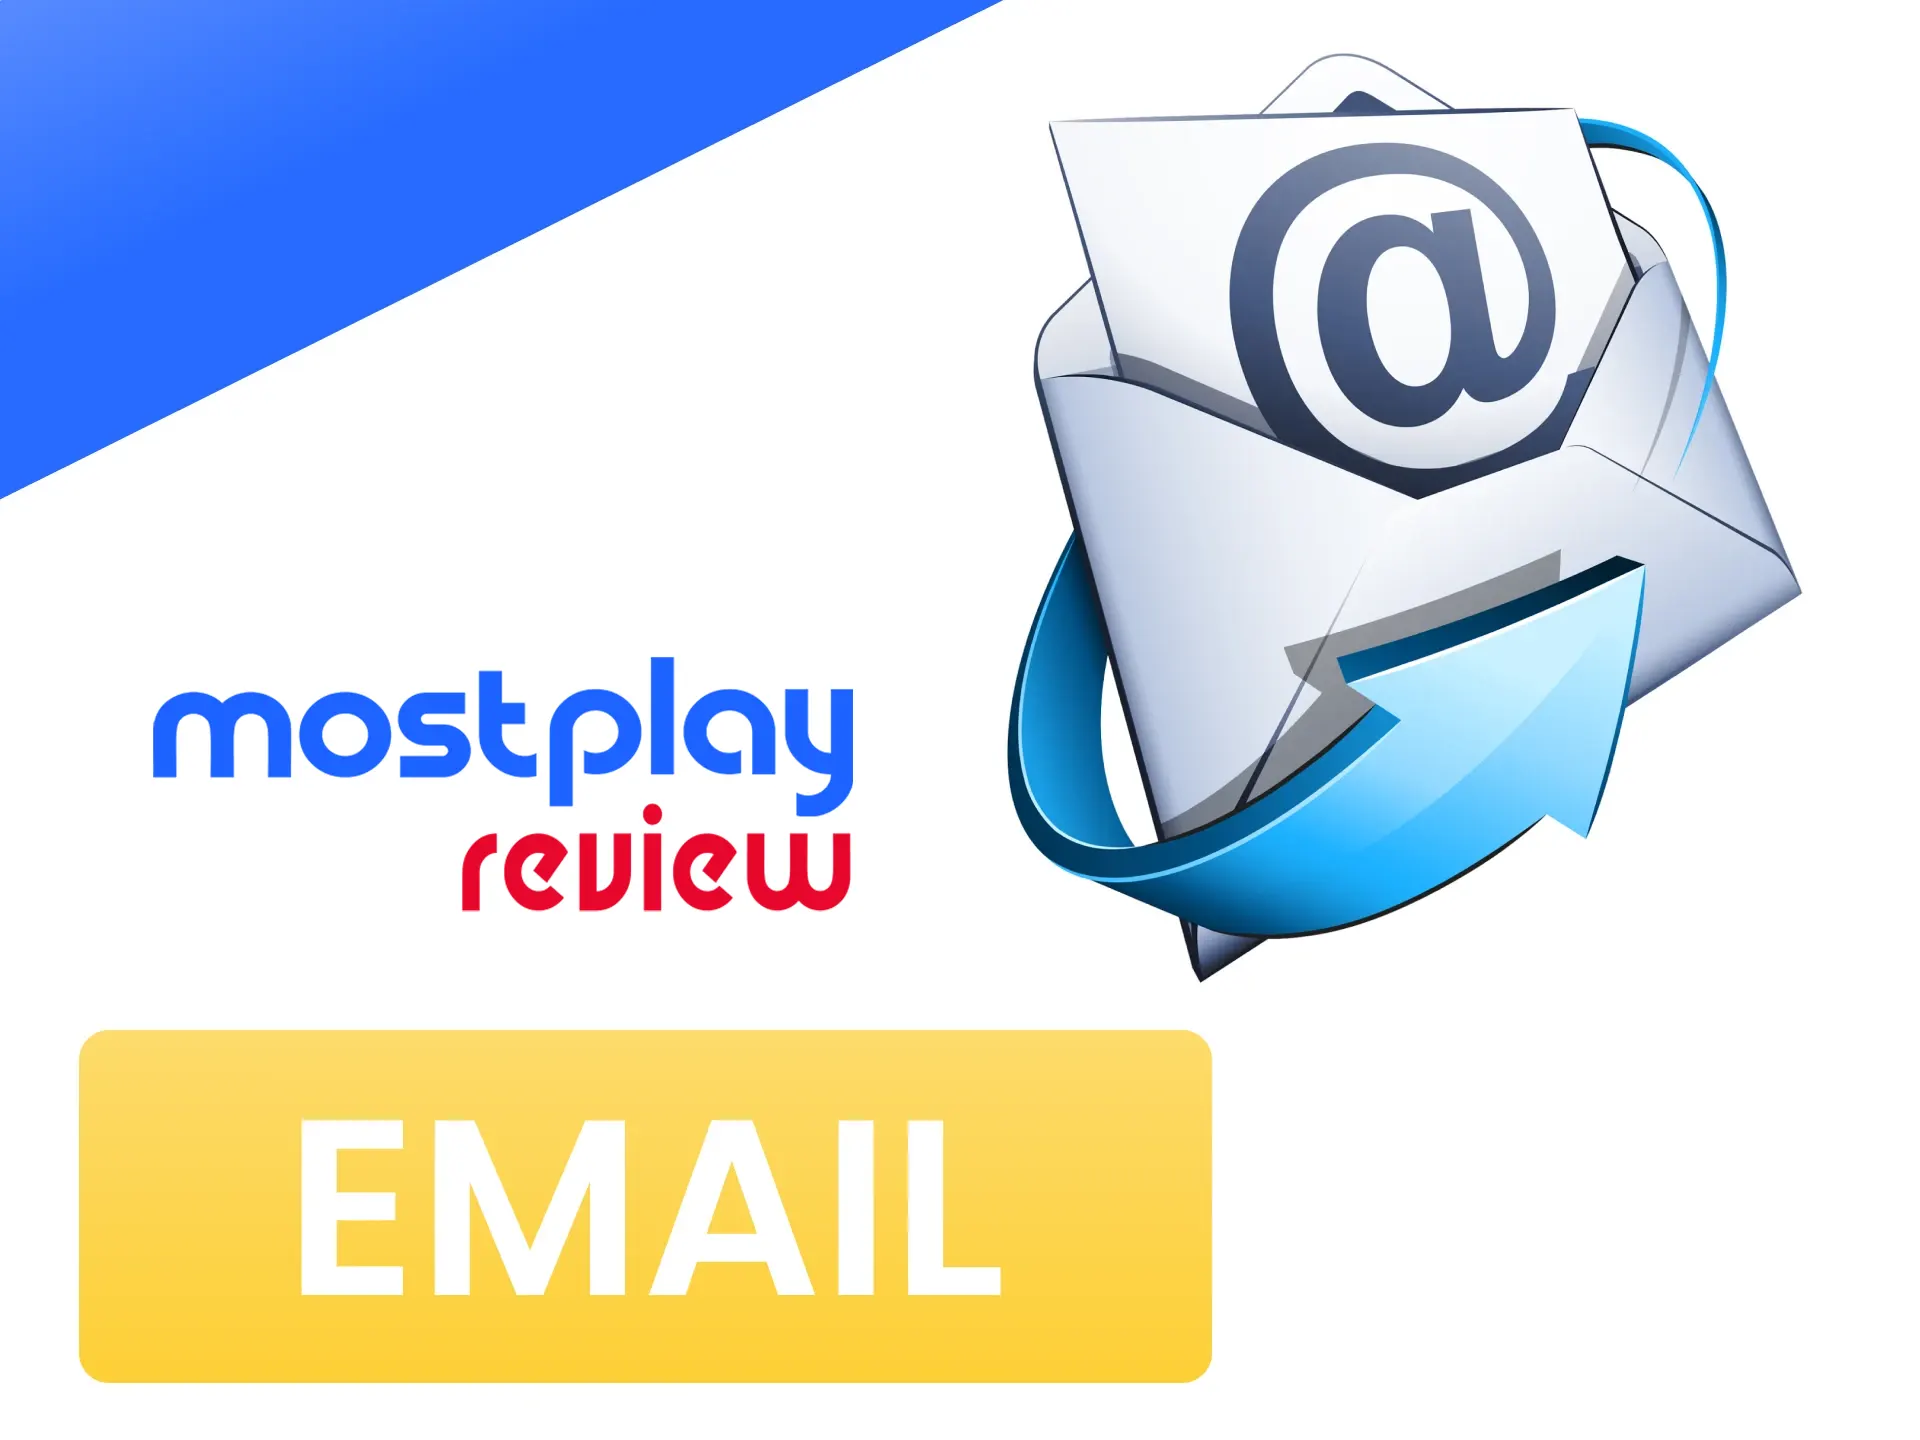 Send an email to Mostplay staff if you have any questions.